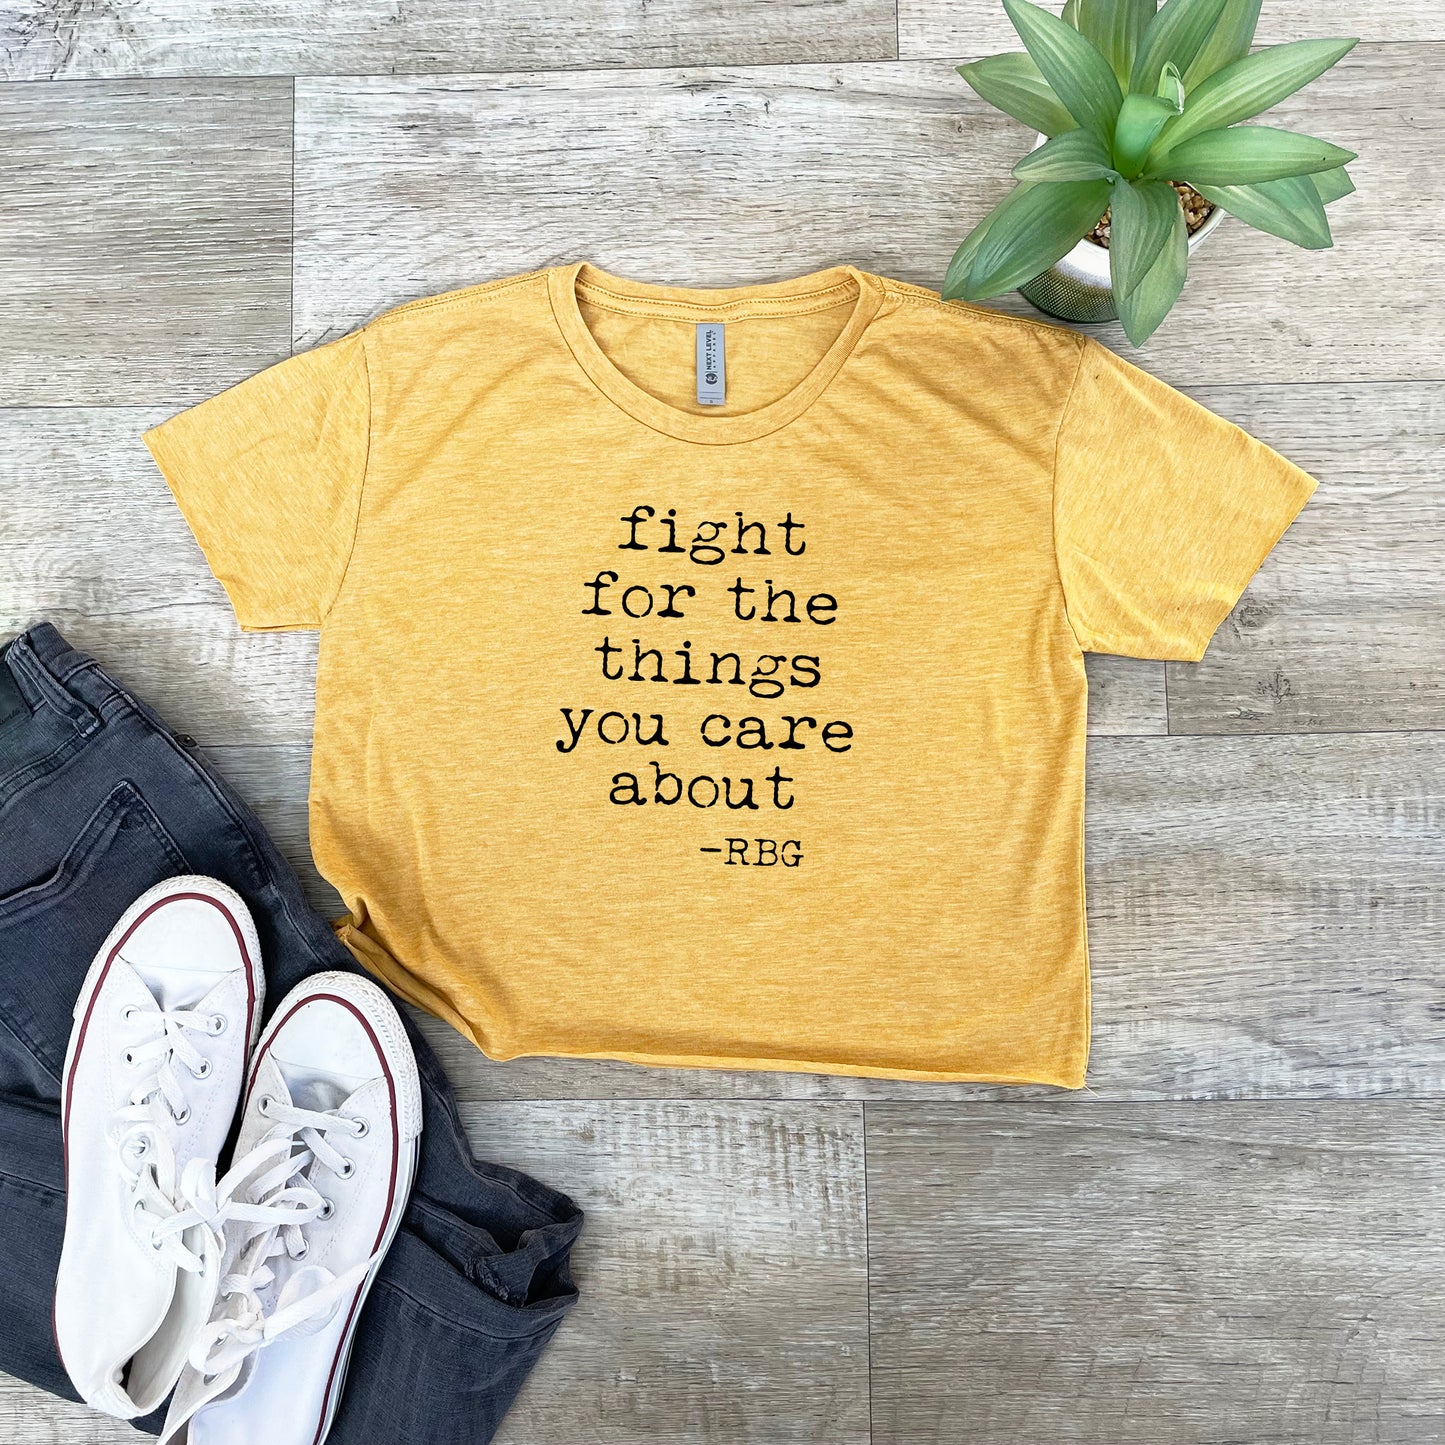 Fight Quote RBG (Ruth Bader Ginsburg) - Women's Crop Tee - Heather Gray or Gold